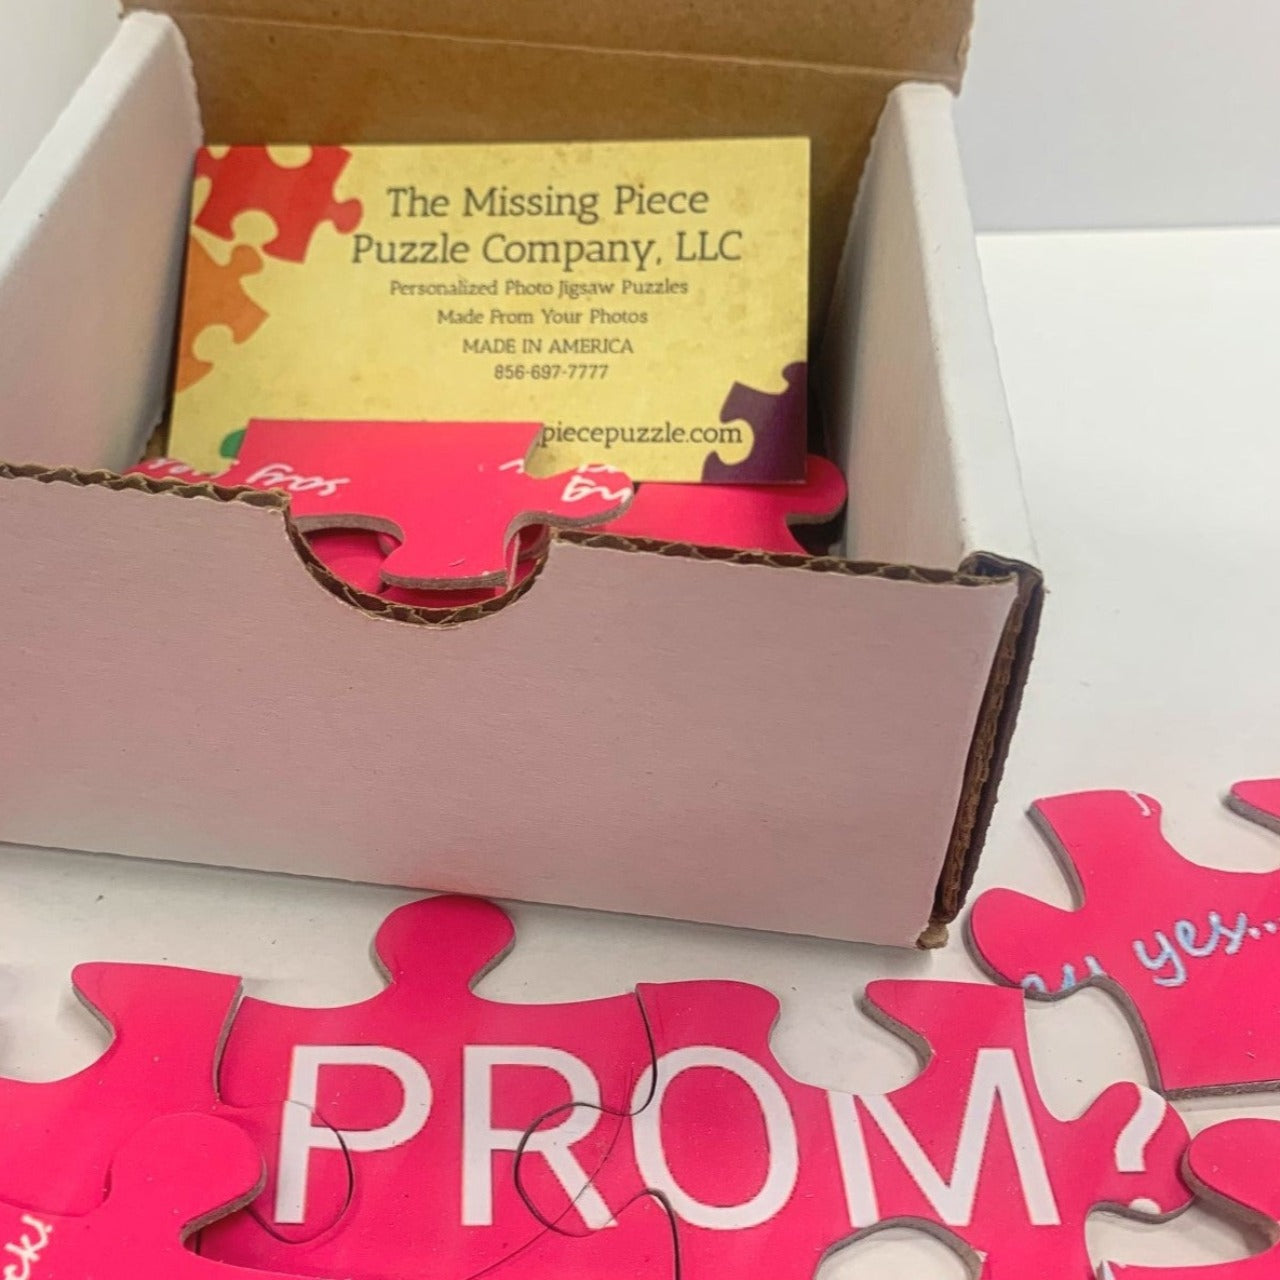 Ask to Prom with Puzzle.  Promposal ideas that are unique and fun.  